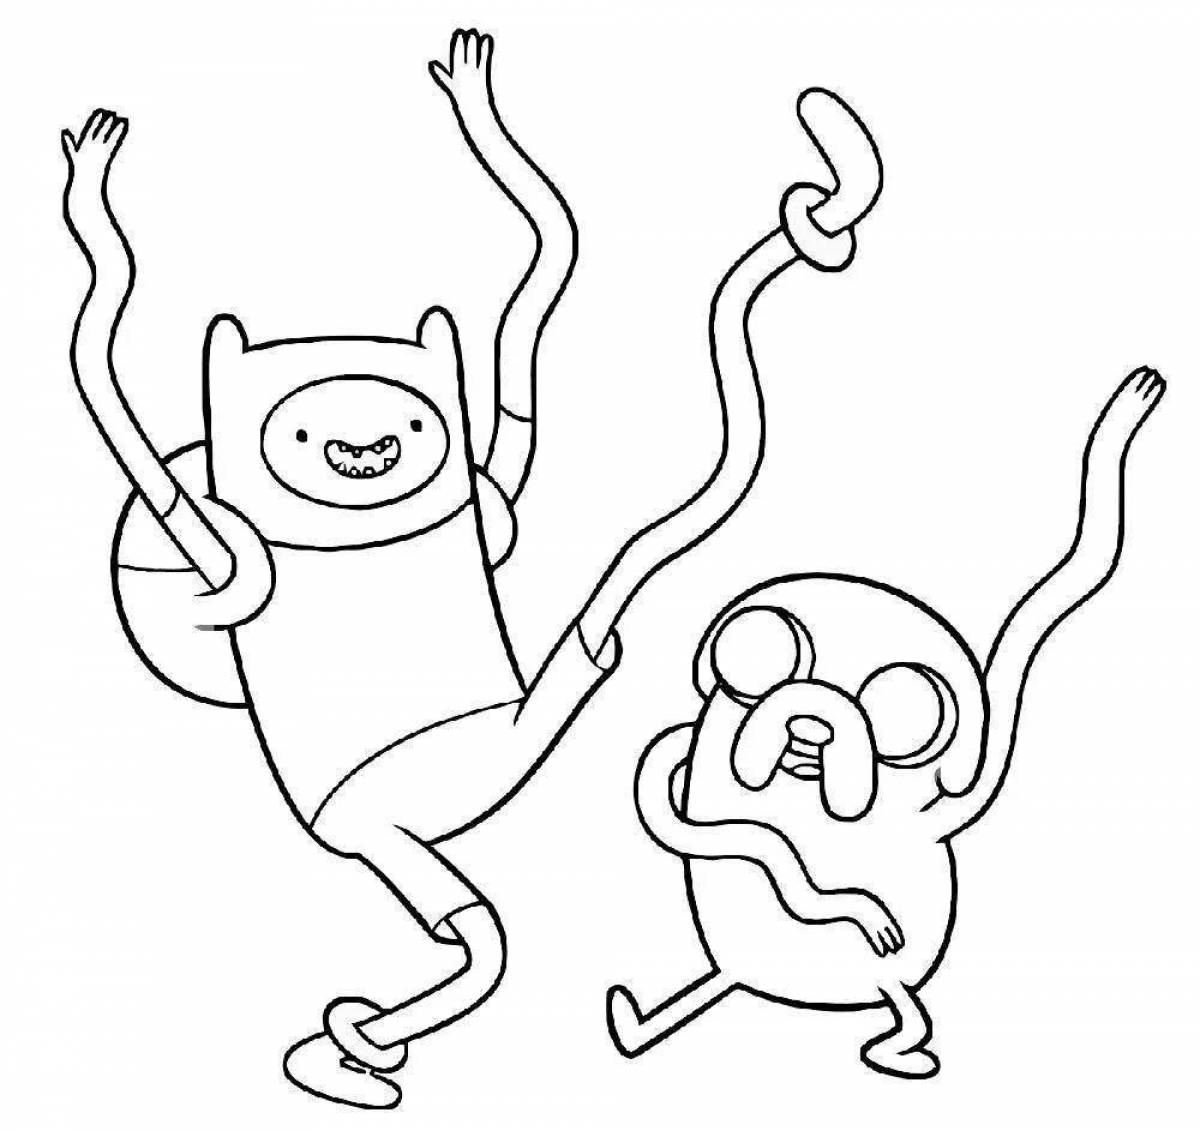 Adventure time fin and jake #2